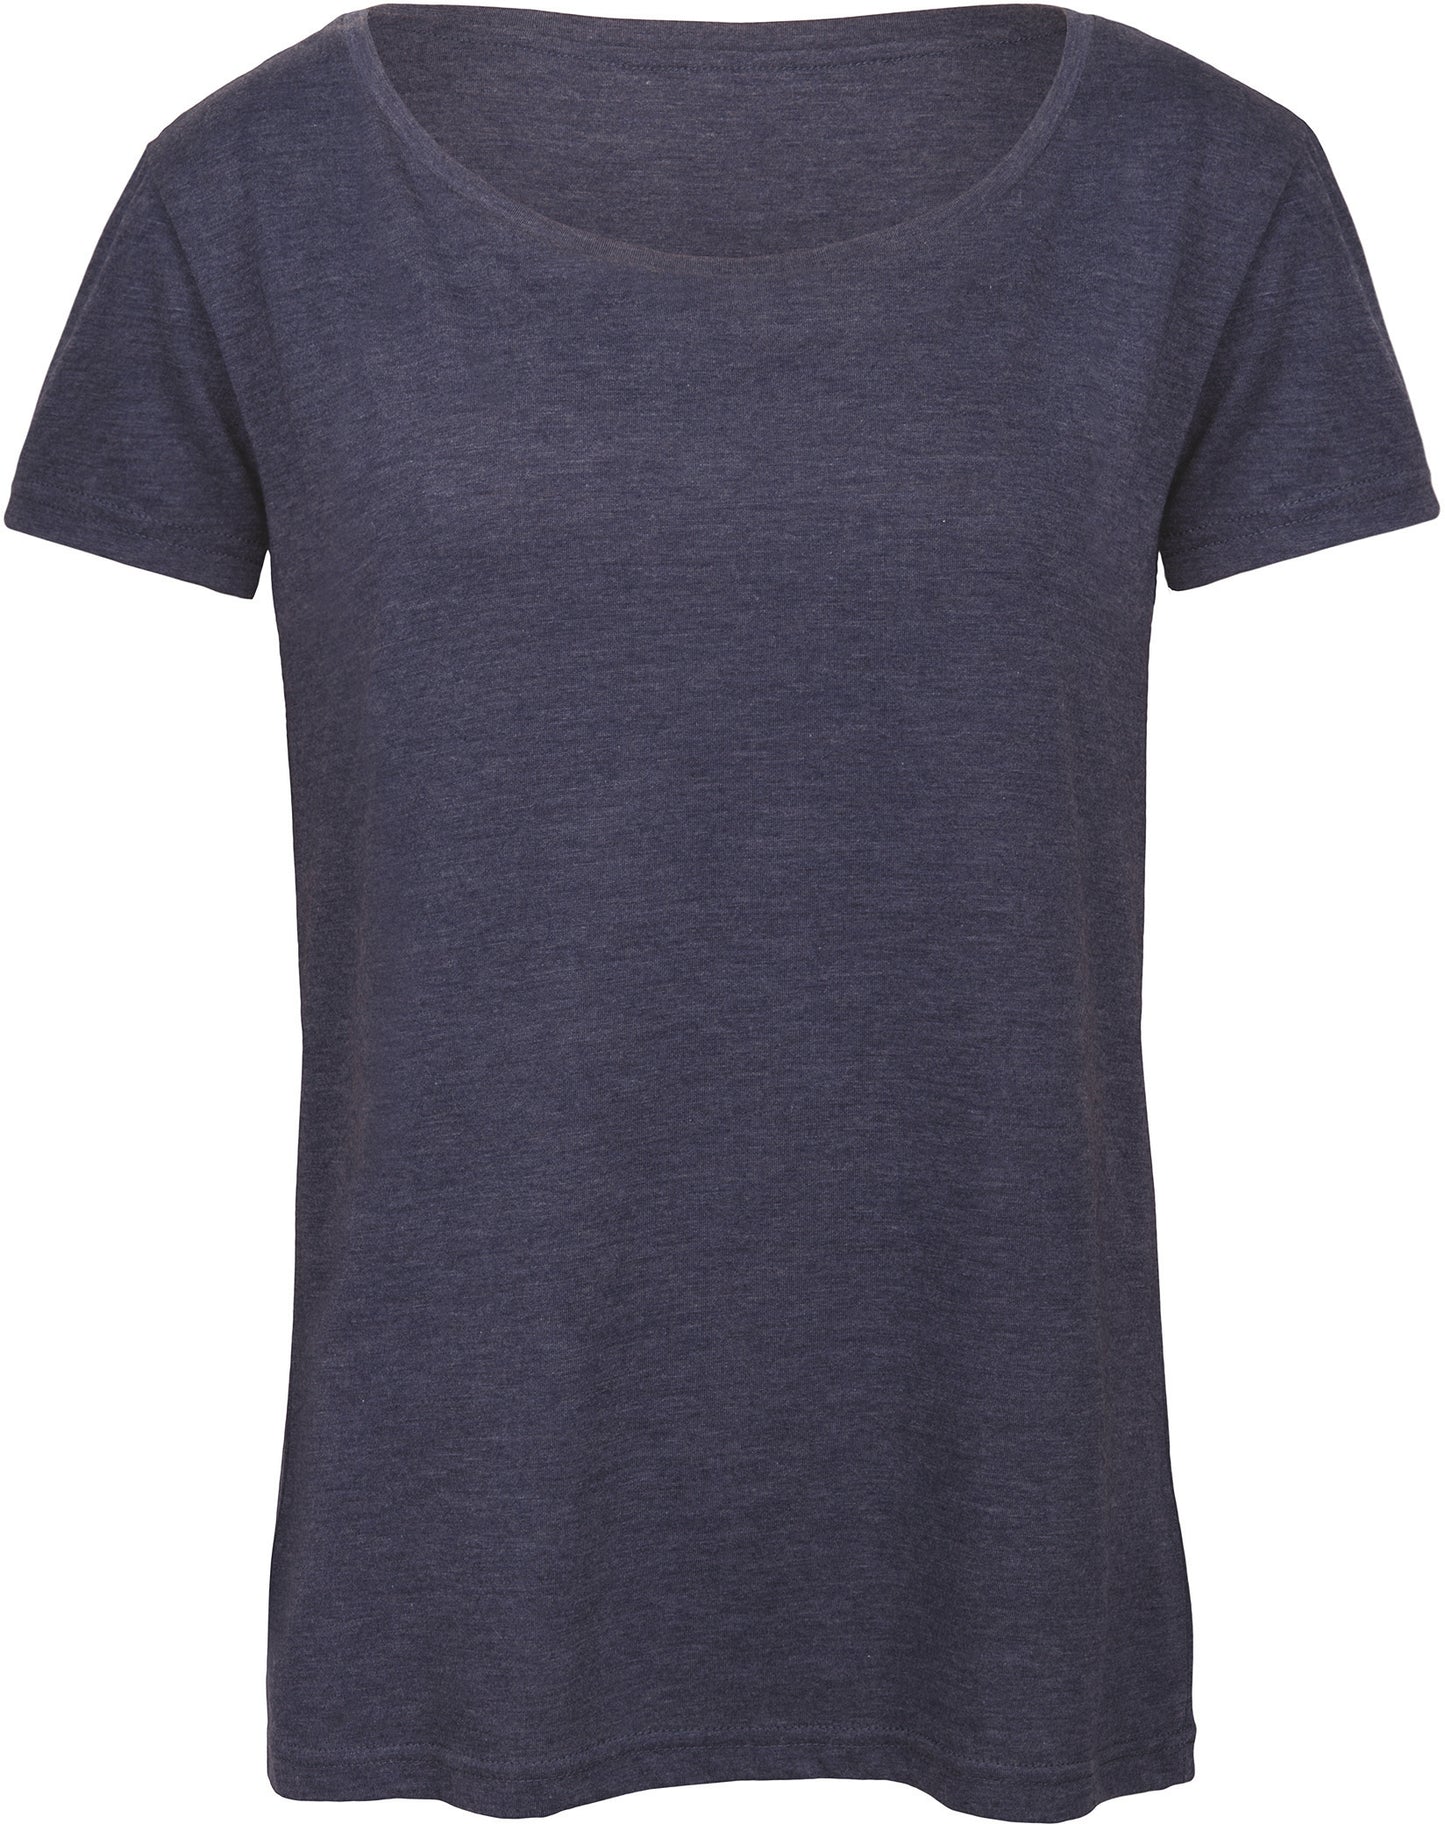 CGTW056 - T-shirt Triblend col rond Femme